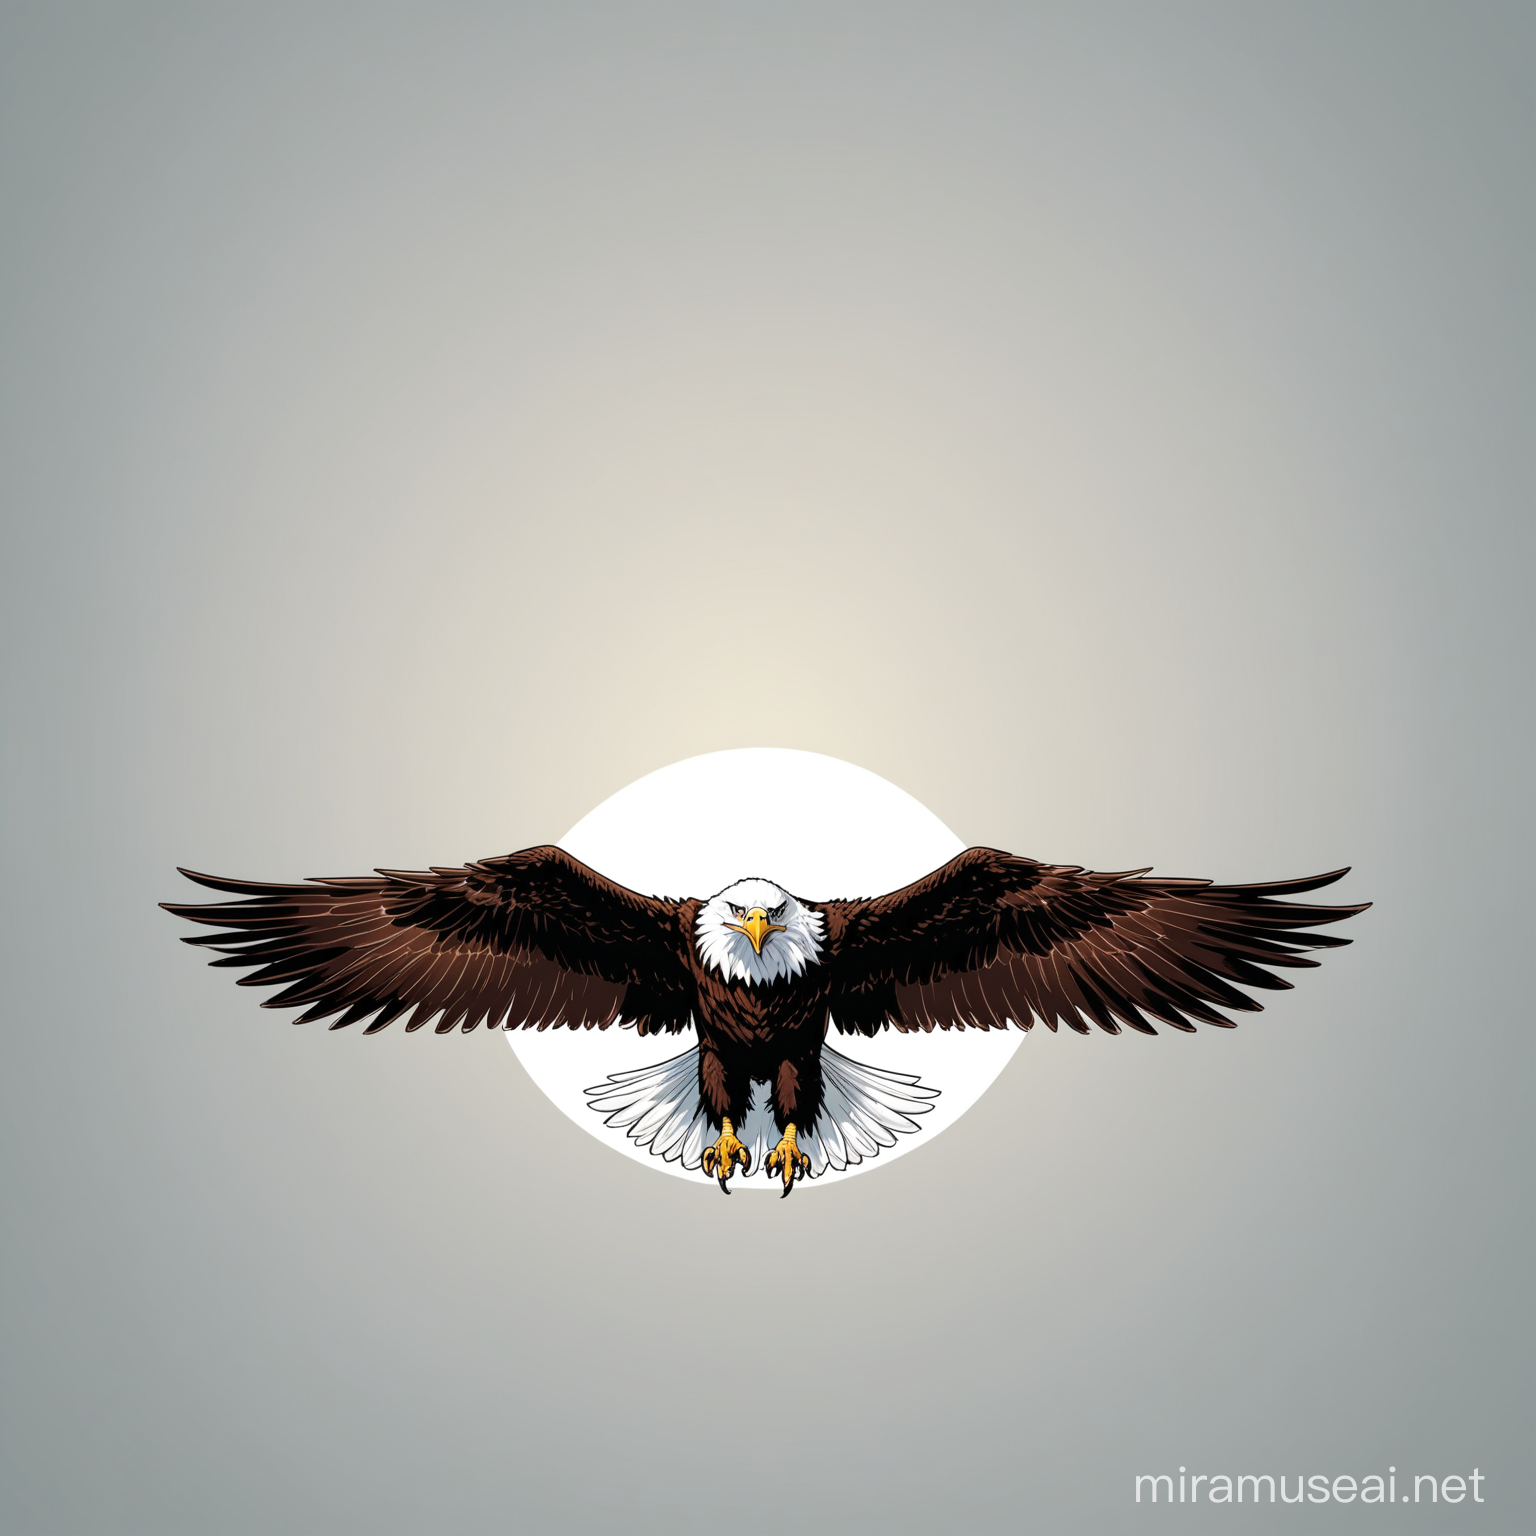 Majestic Eagle Spreading Wings in Full Display